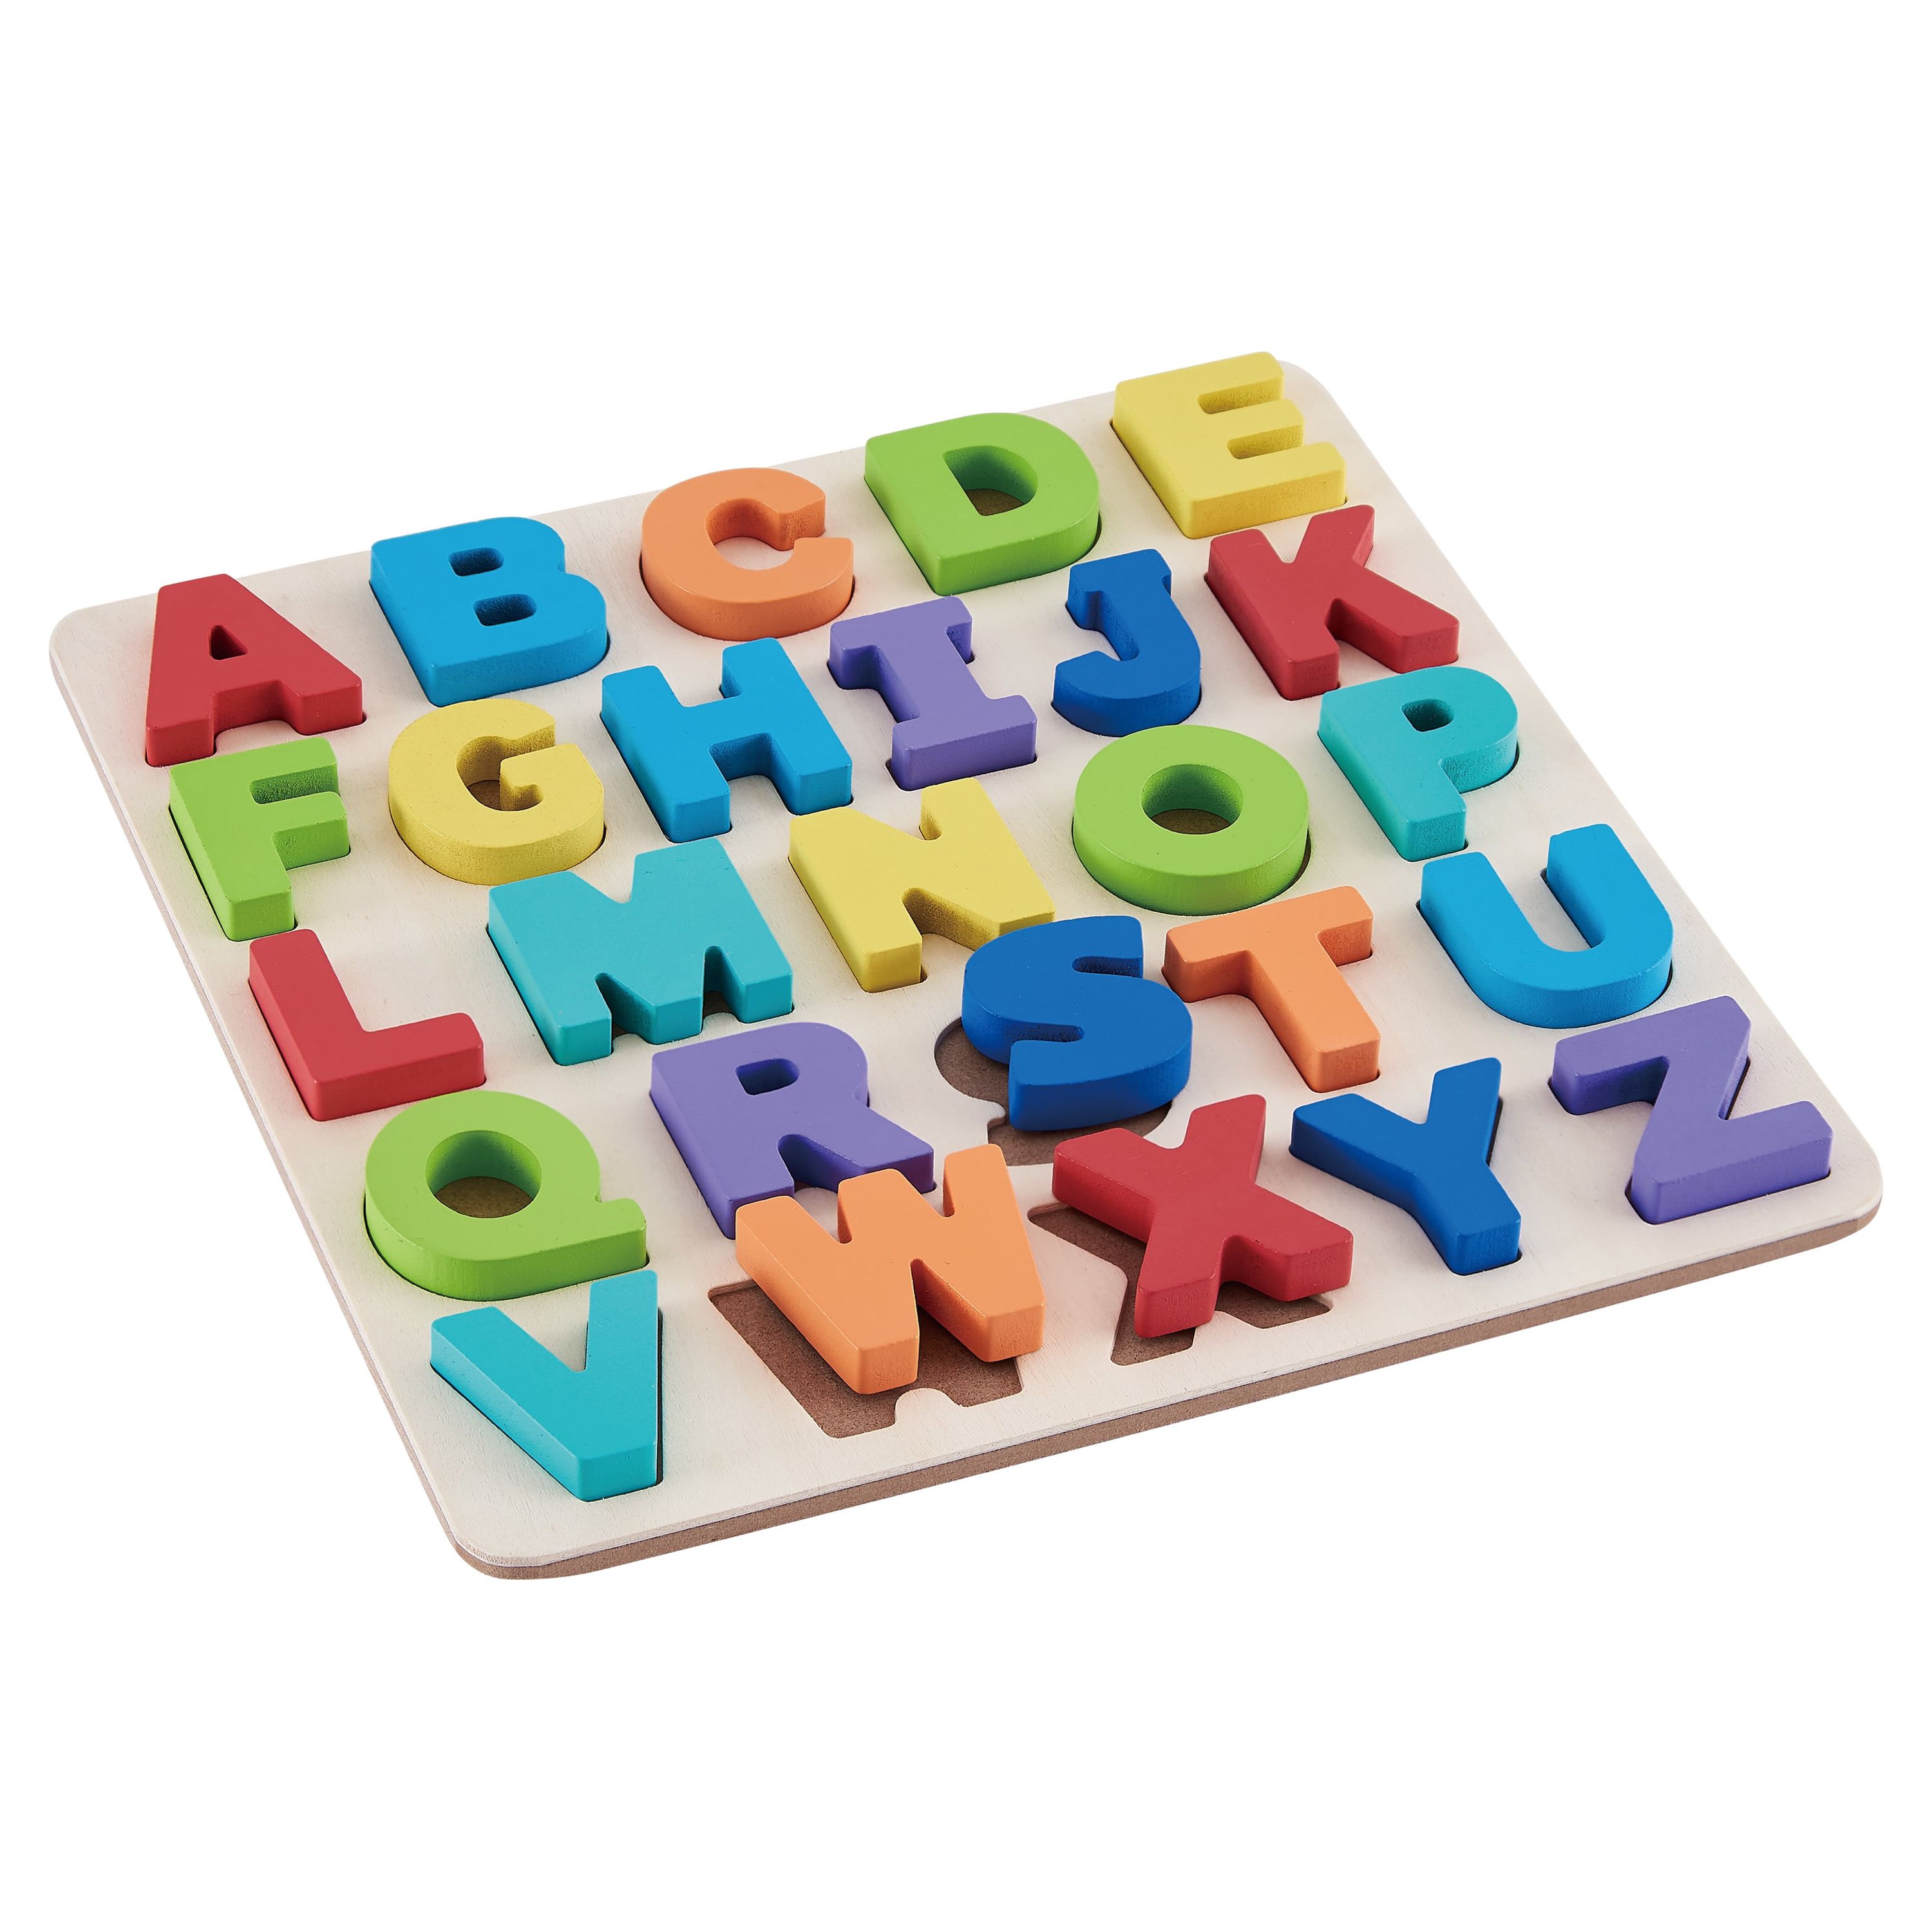 Spark. Create. Imagine Alphabet Puzzle Wooden Puzzle for Ages 18 Months to 70 Months - image 3 of 6